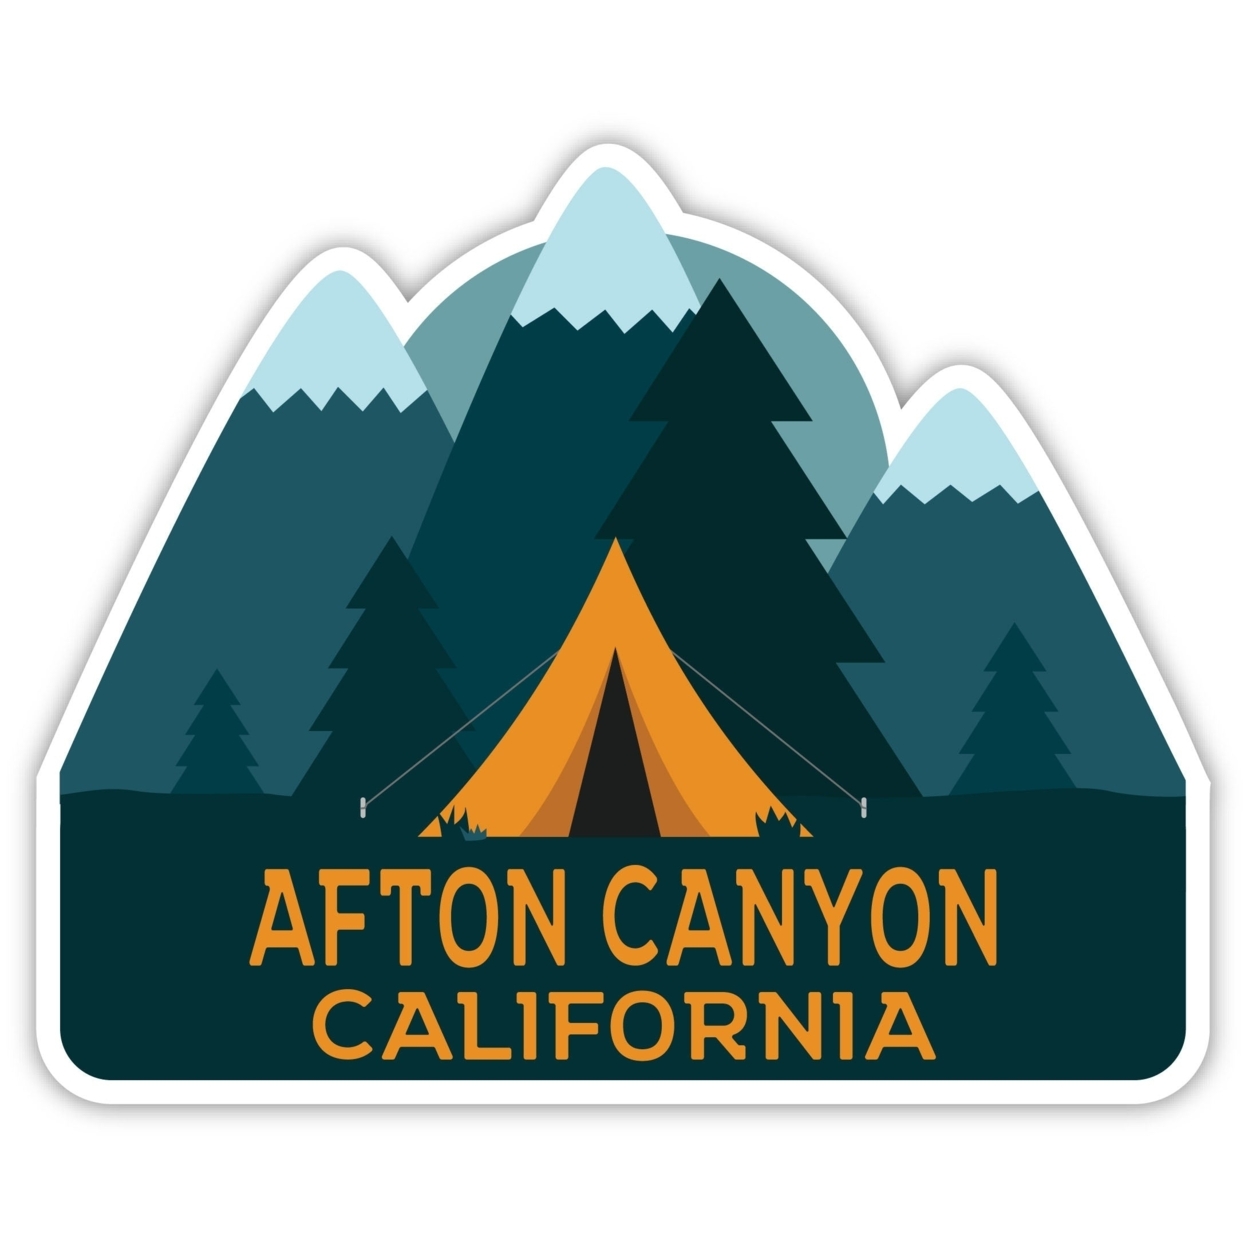 Afton Canyon California Souvenir Decorative Stickers (Choose Theme And Size) - 4-Pack, 12-Inch, Tent